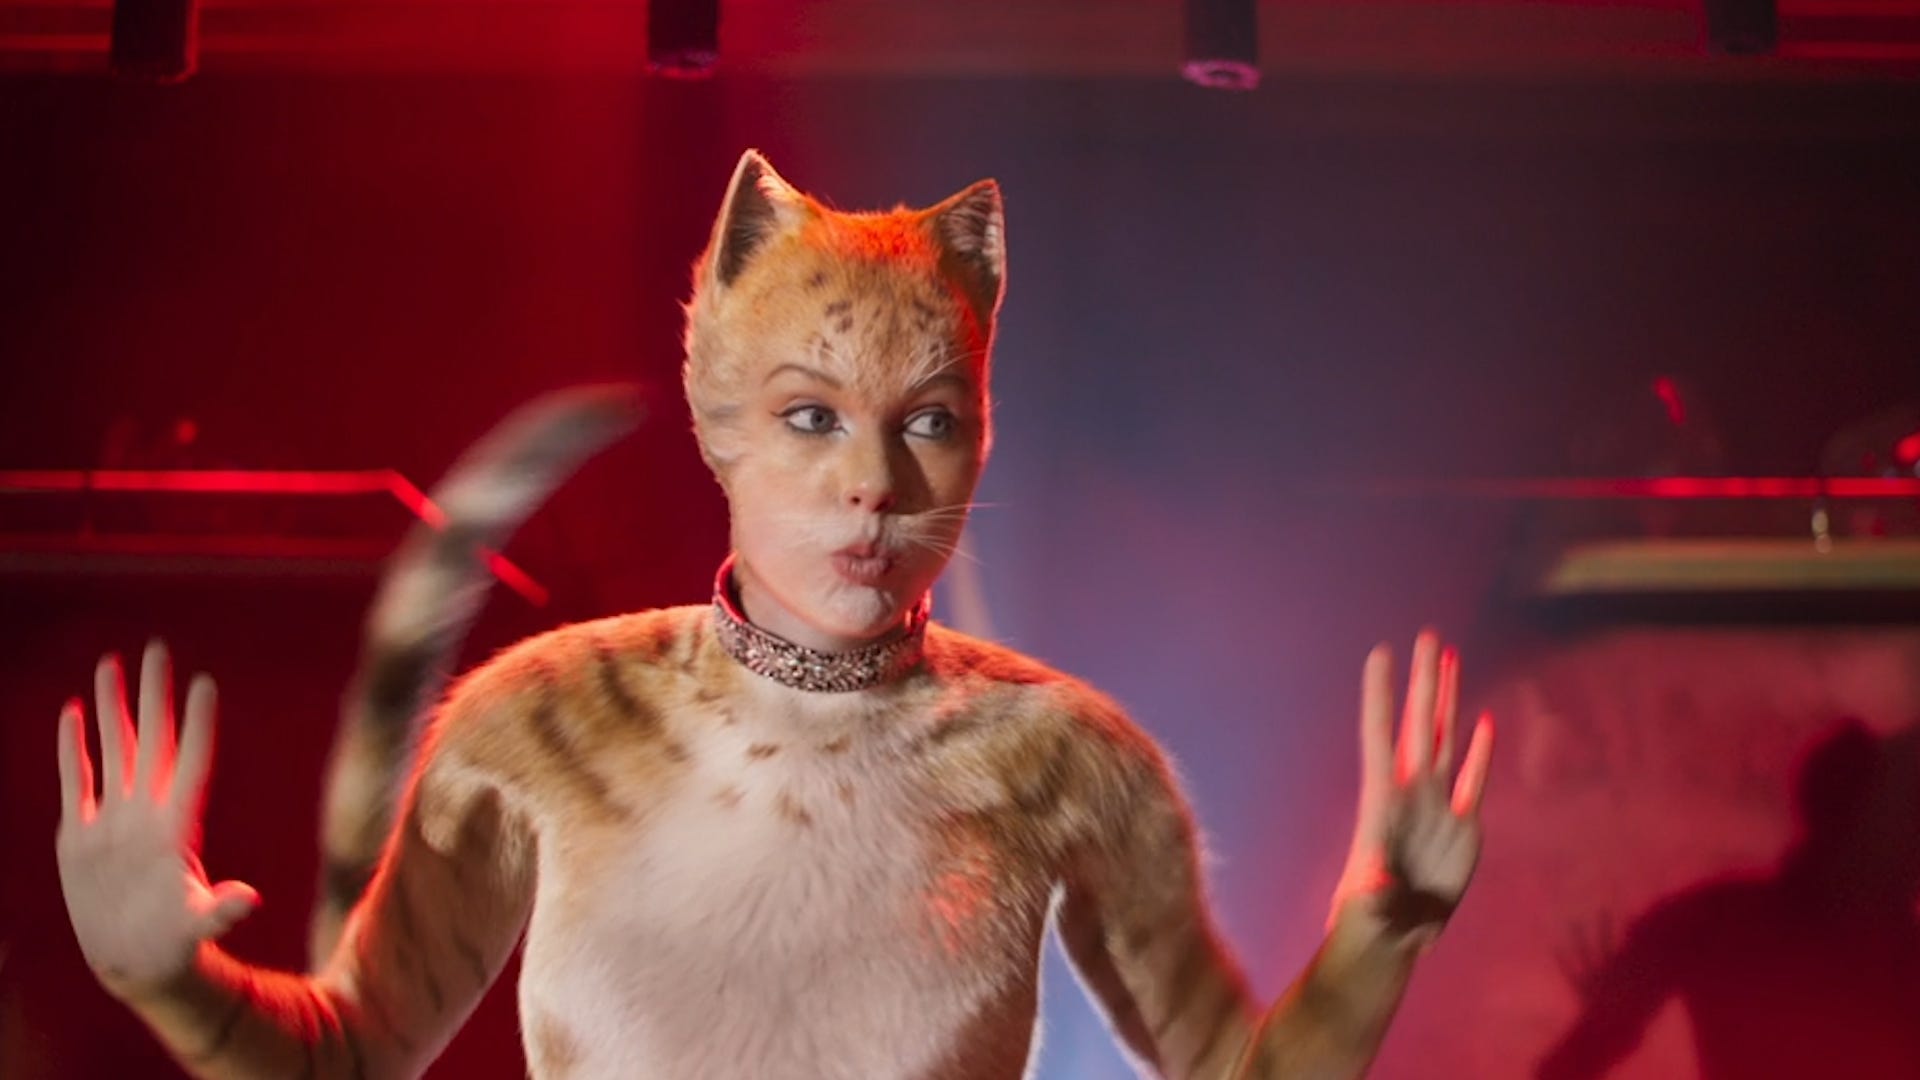 Cats Taylor Swift Has One Line In The Movie But Crushes